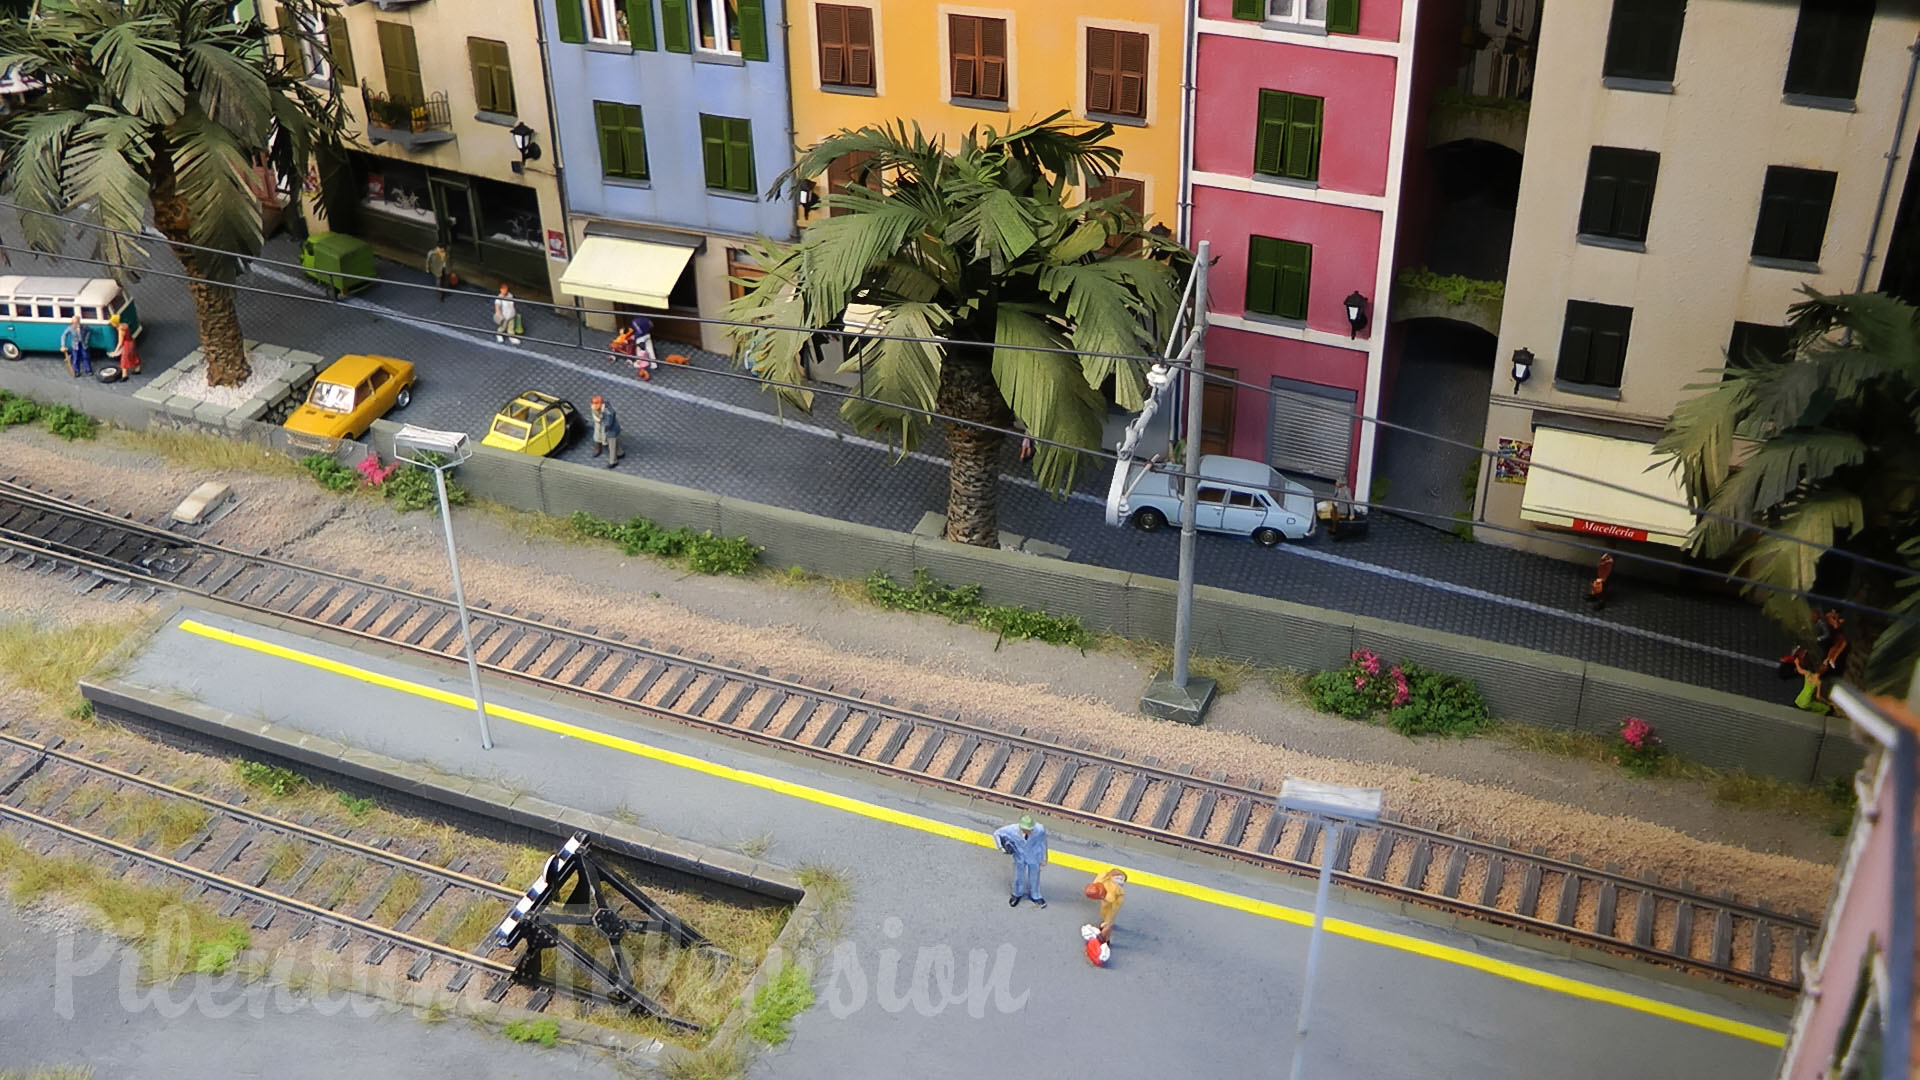 Model Railroad of Italy - Giacomo - 1/87 Scale ACME and Rivarossi Model Train Layout by Maurice Kleverwal